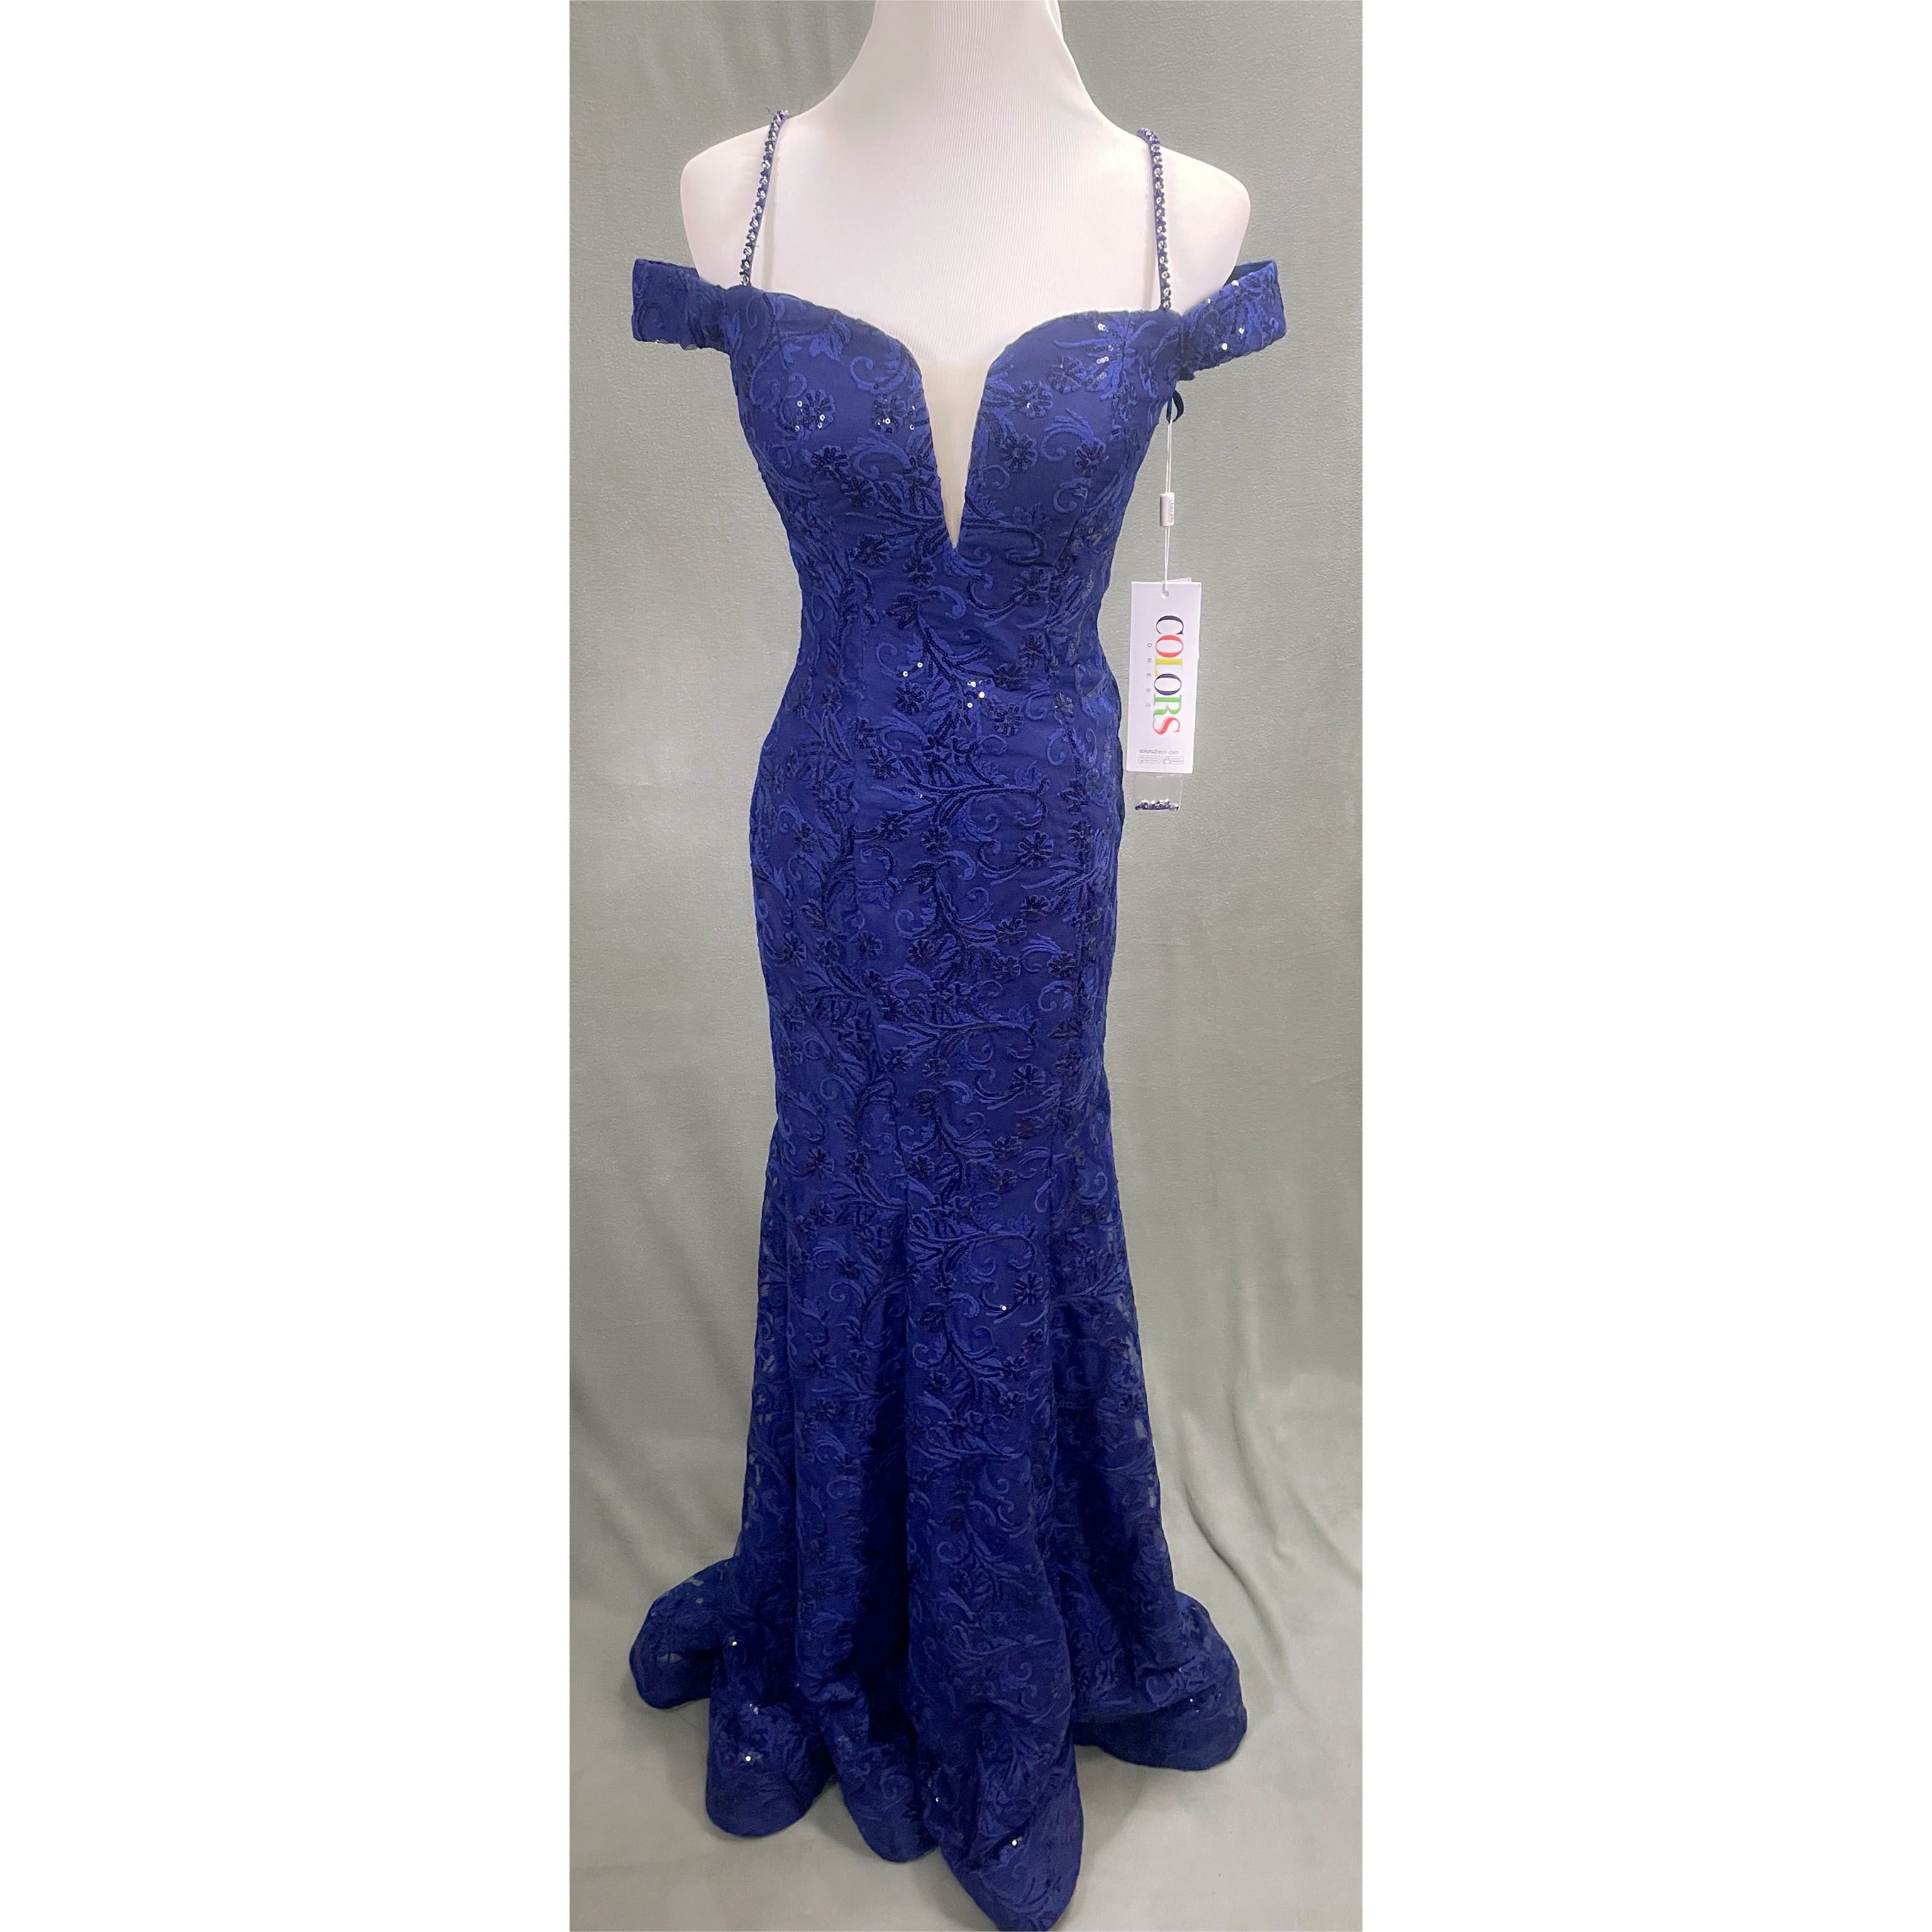 Colors cobalt beaded dress, size 2, NEW WITH TAGS!